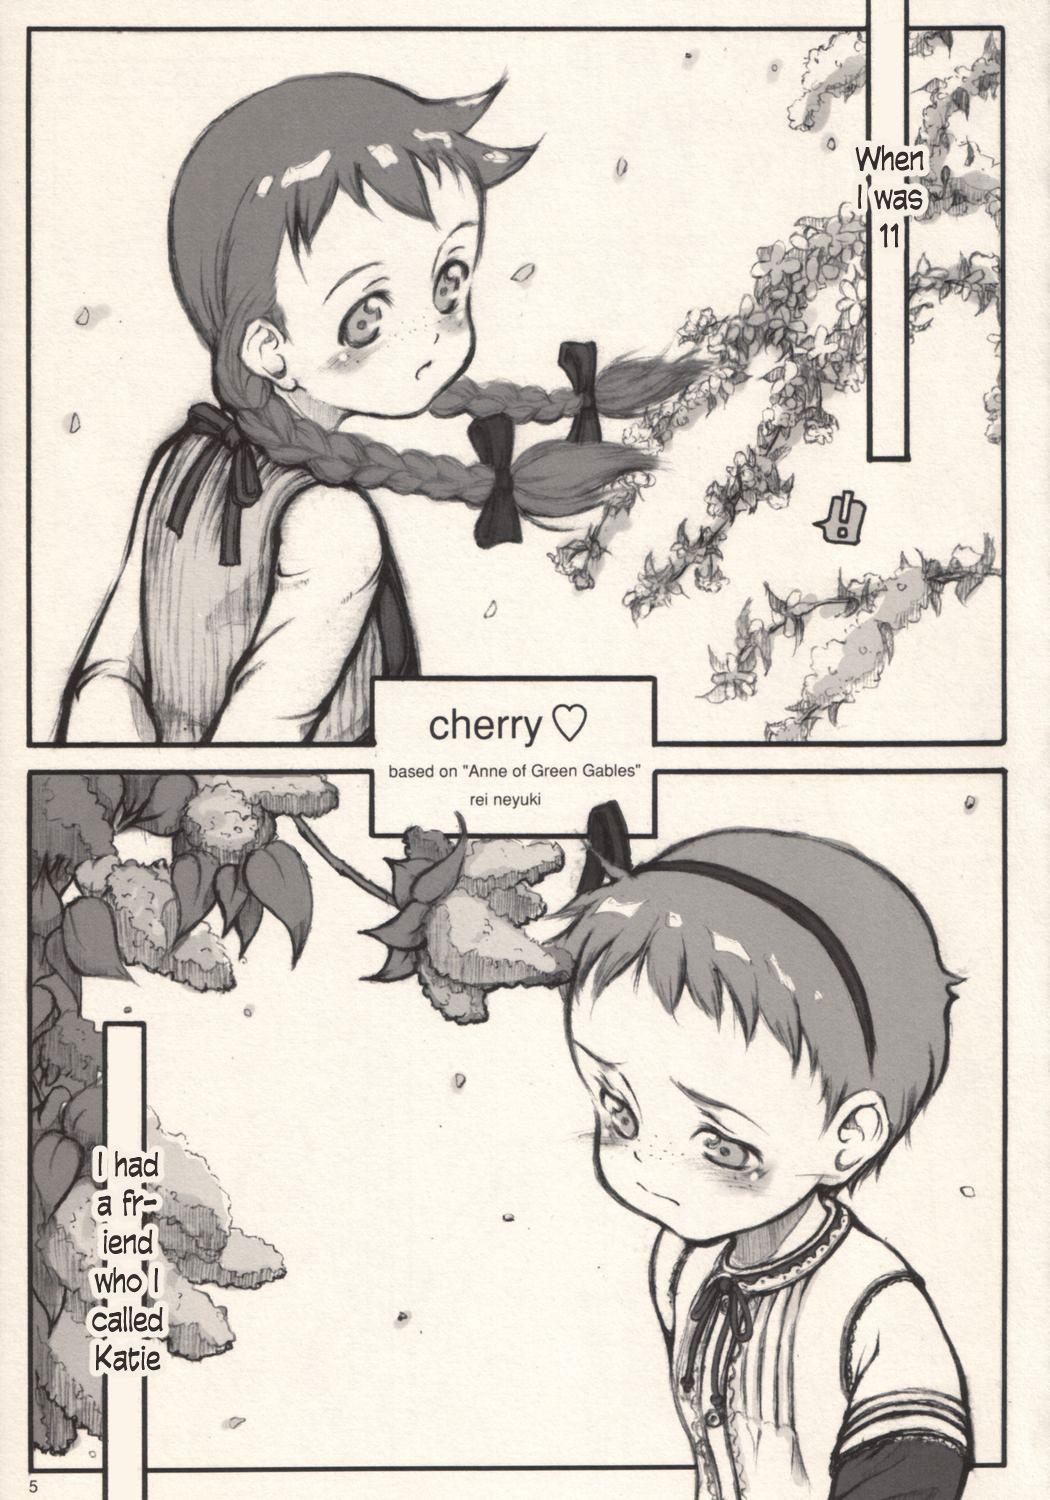 Ngentot cherry - World masterpiece theater Anne of green gables | akage no anne Reversecowgirl - Page 4